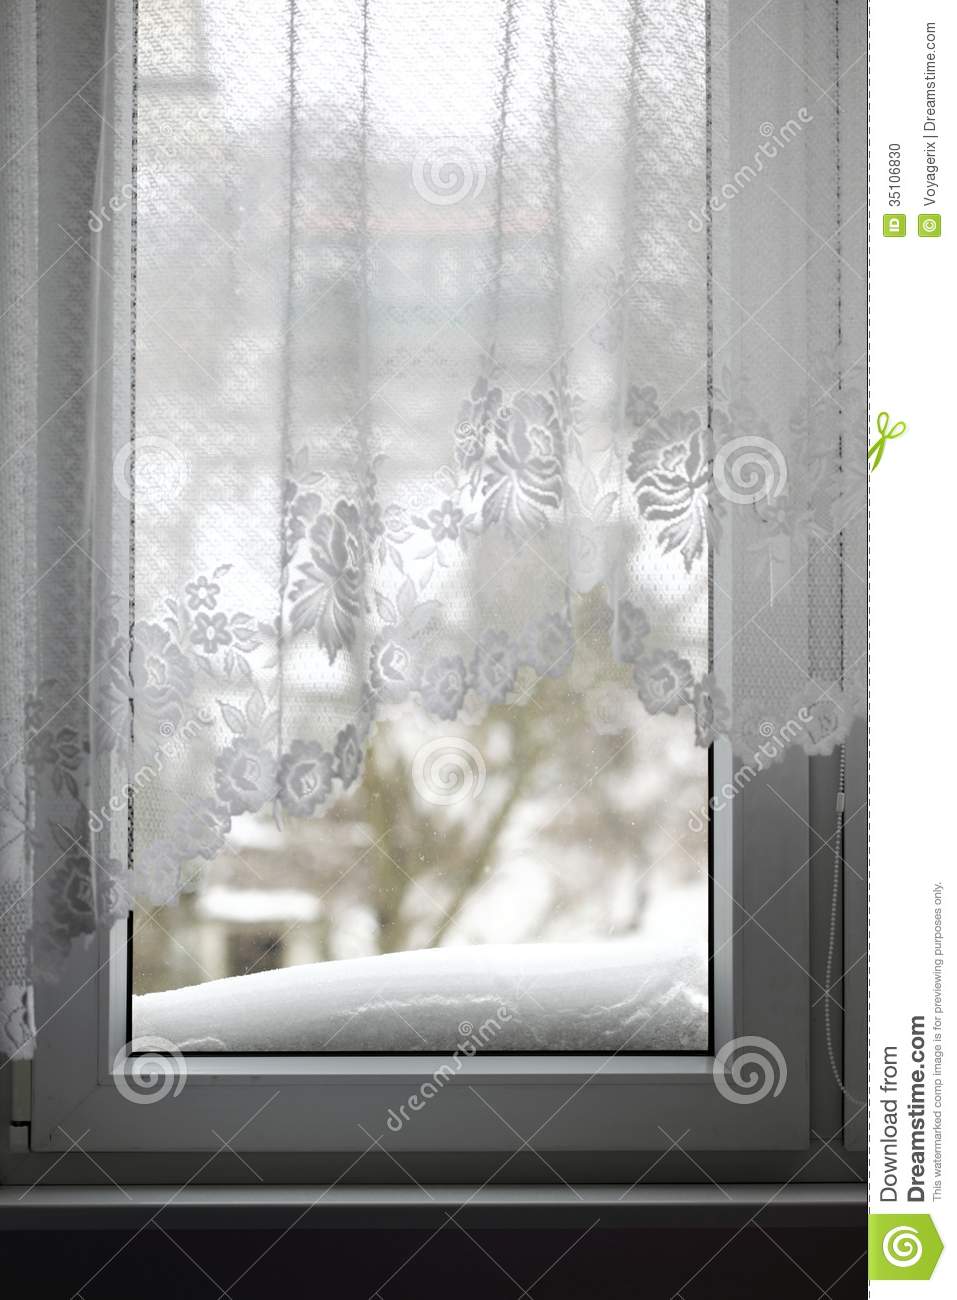 Window With View To A Snowy Winter Scene Stock Photo   Image  35106830